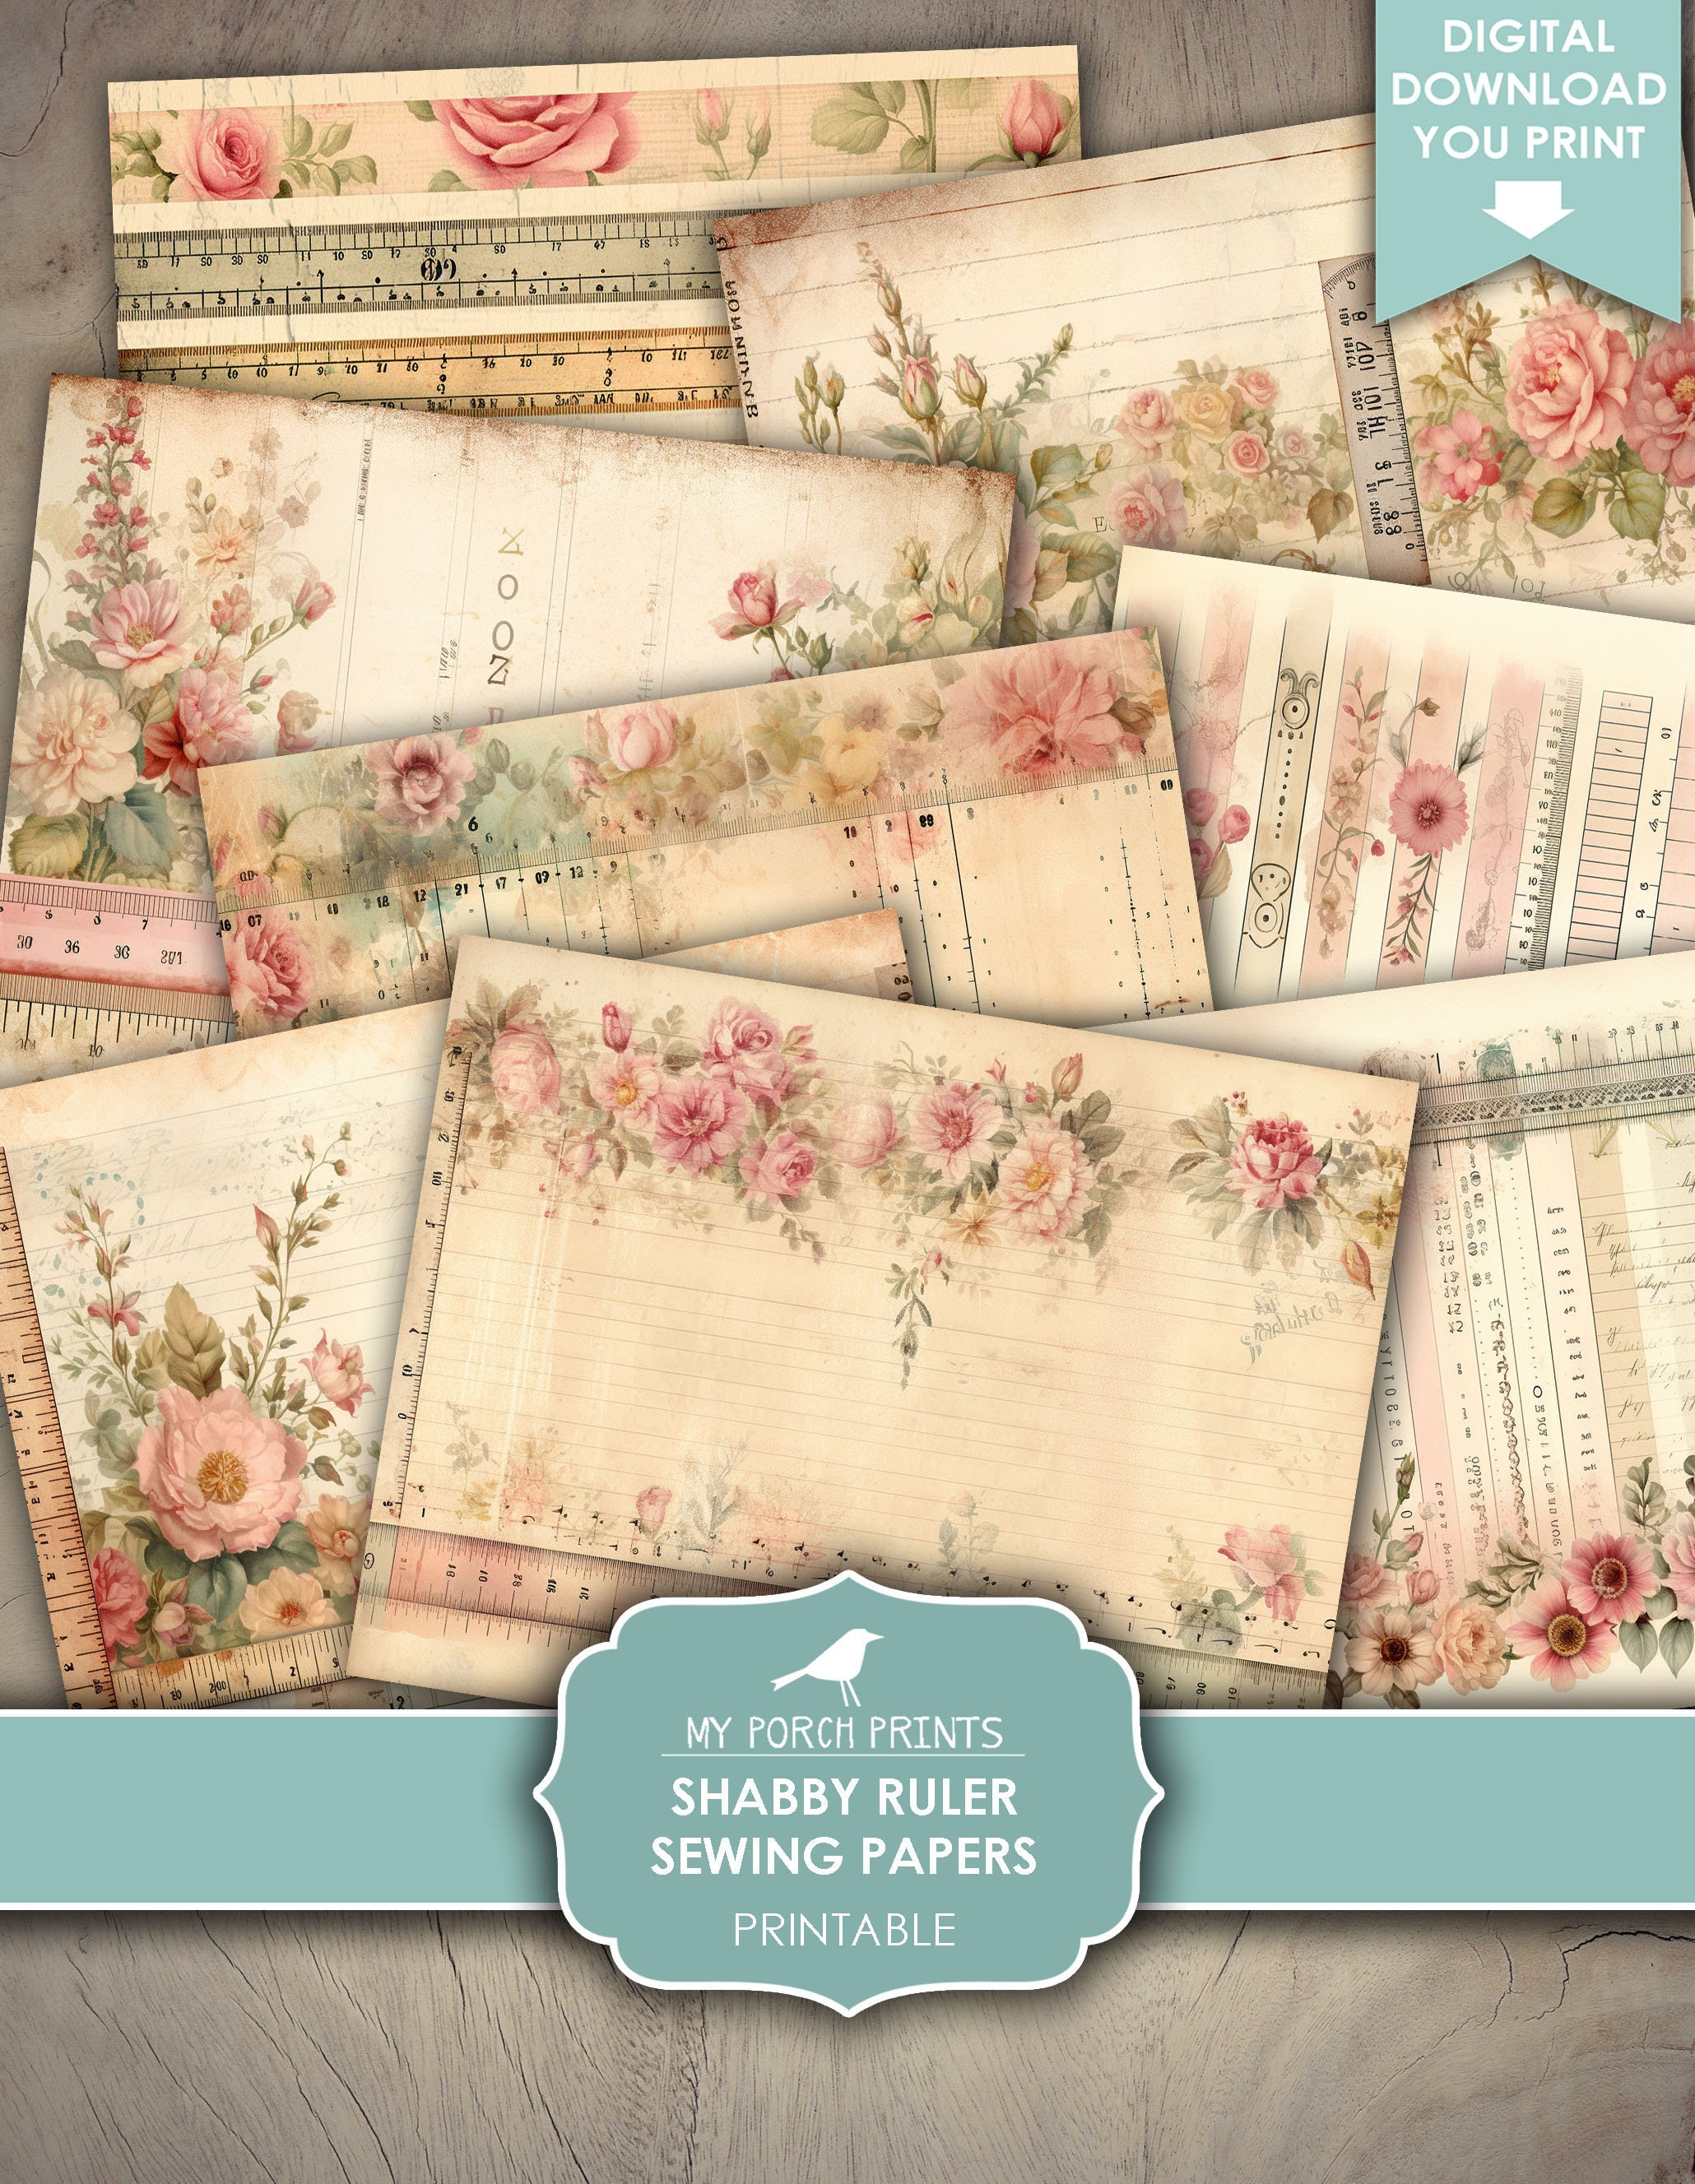 Junk Journal Papers Shabby Ruler Sewing Pink Floral